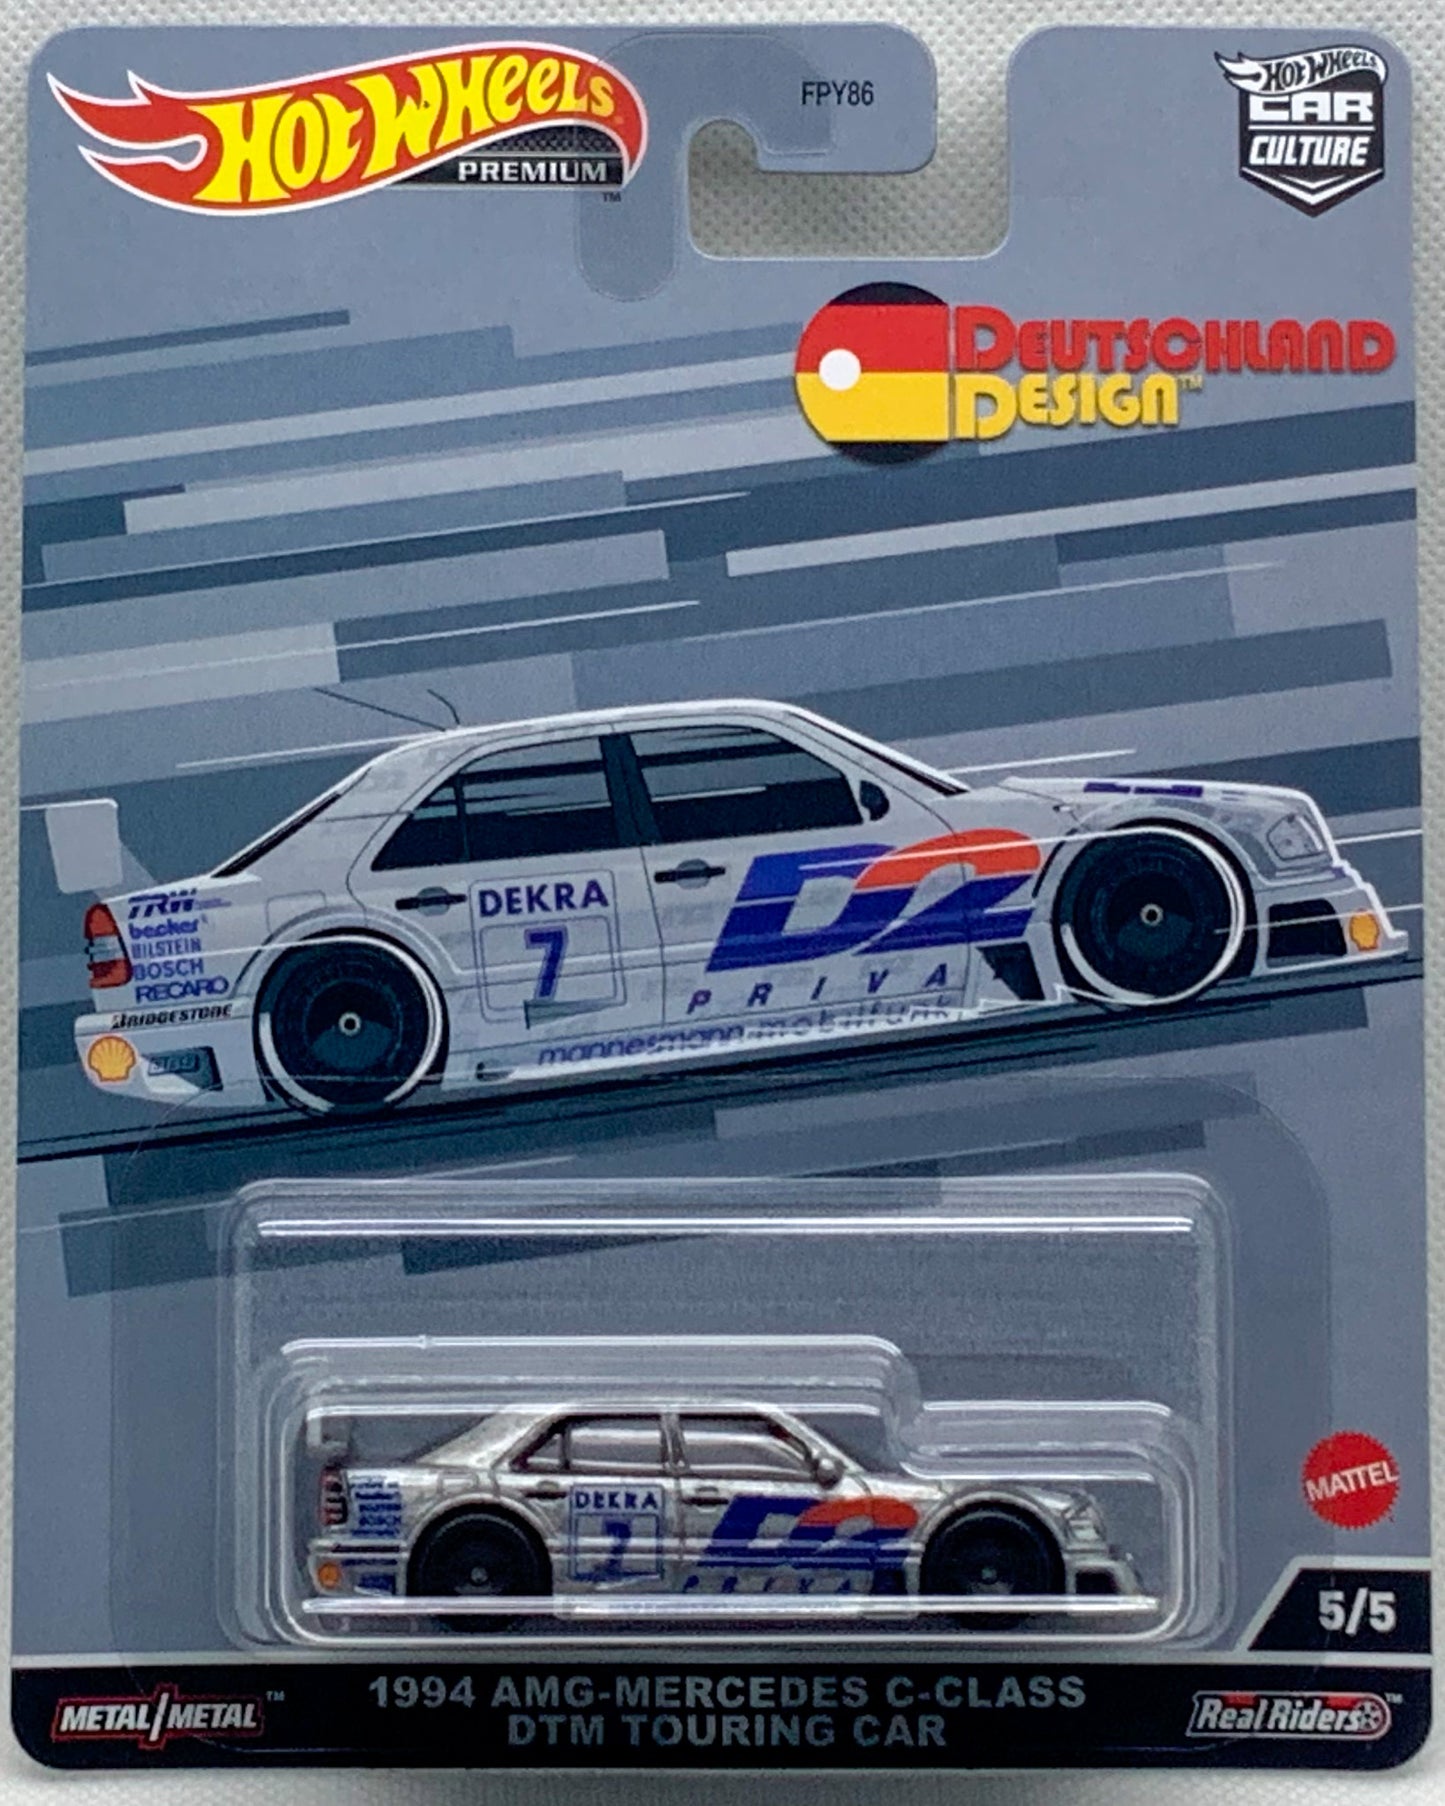 Buy at Tatoy Hot Wheels Car Culture 1994 AMG-Mercedes C-Class DTM Touring Car 5/5 Number 5 from the set of 5 Deutschland Design Series Premium Real Riders Metal Mattel FPY86 Shop Now